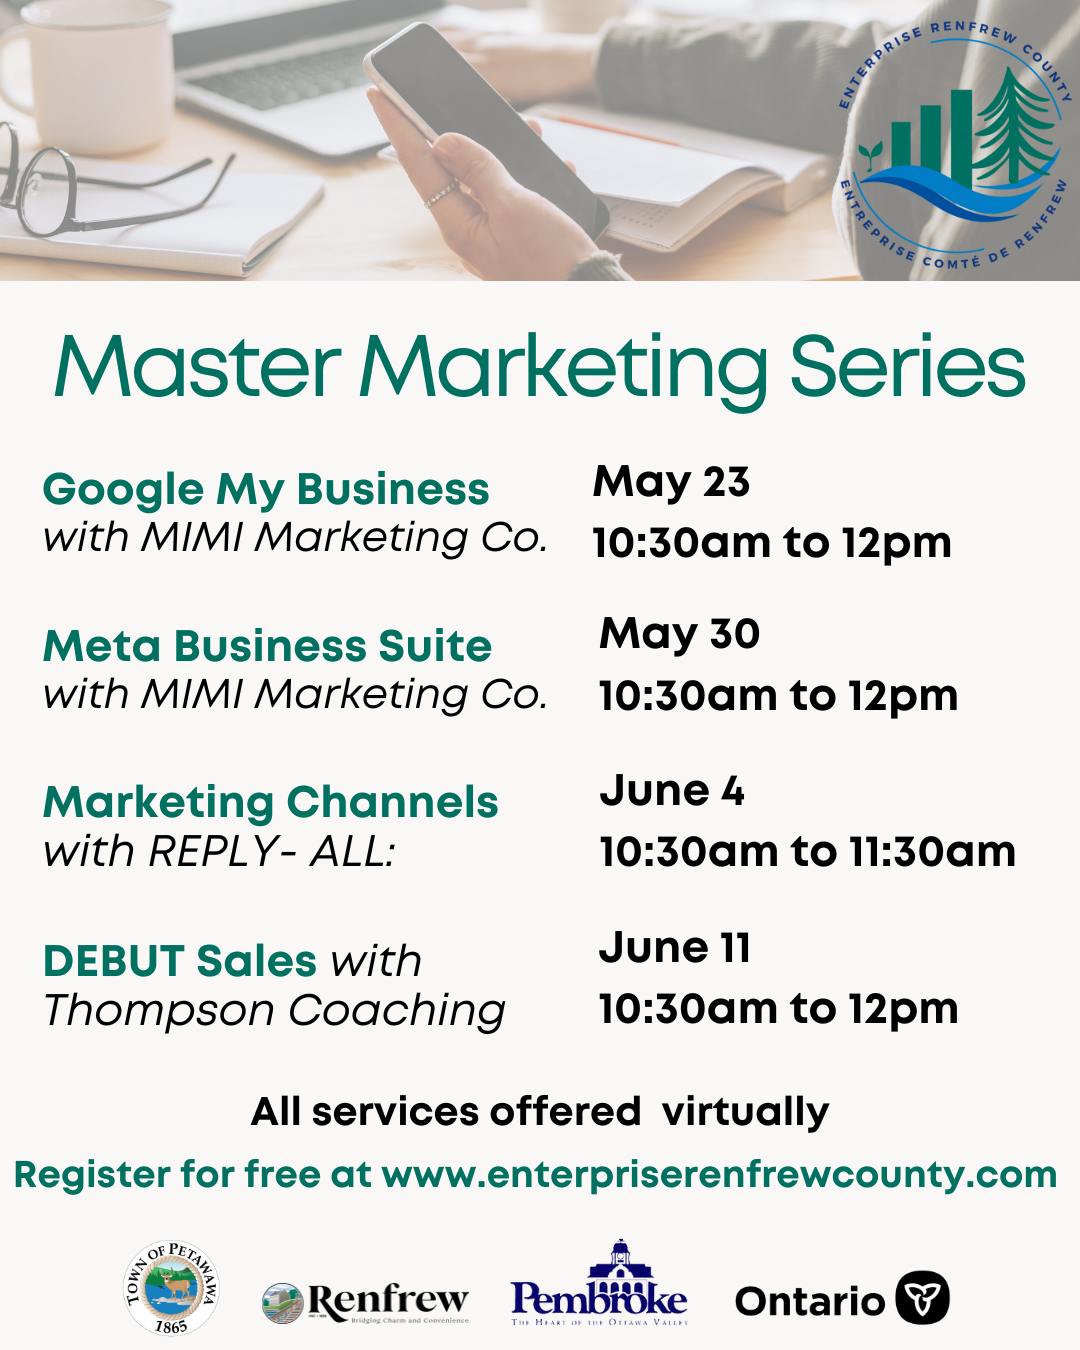 A listing of webinar dates and topics for the Master Marketing Classes